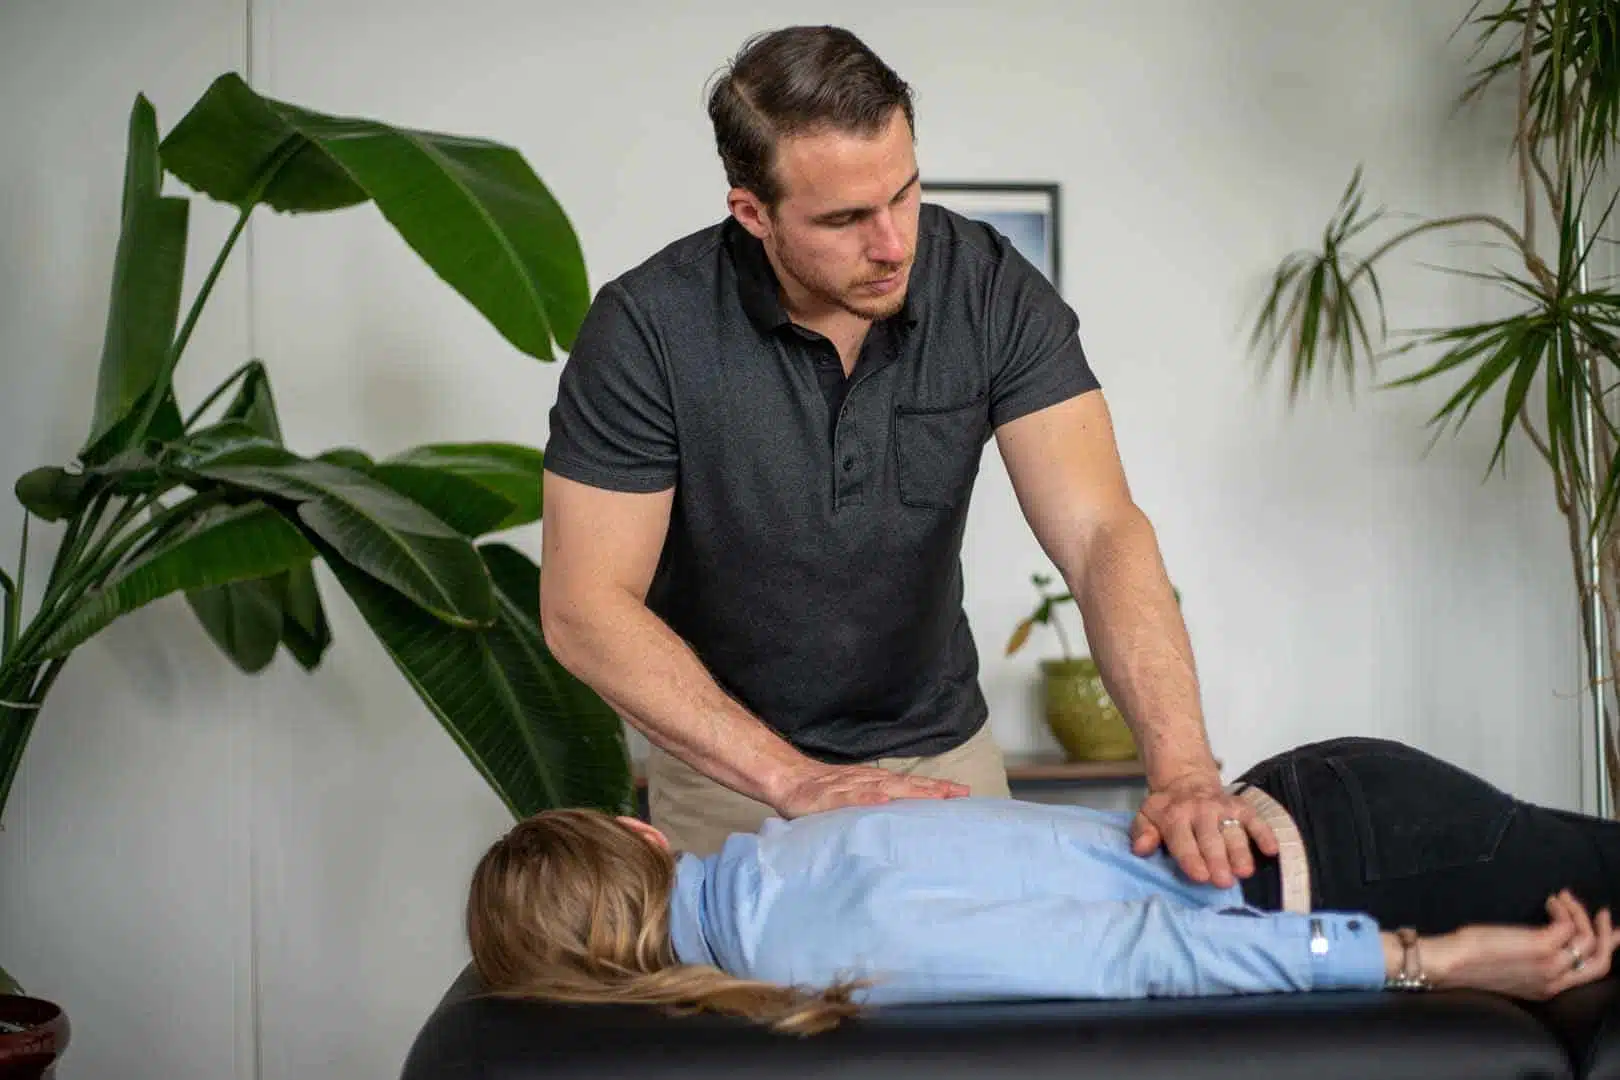 A Chiropractor Perform an Adjustment to his patient